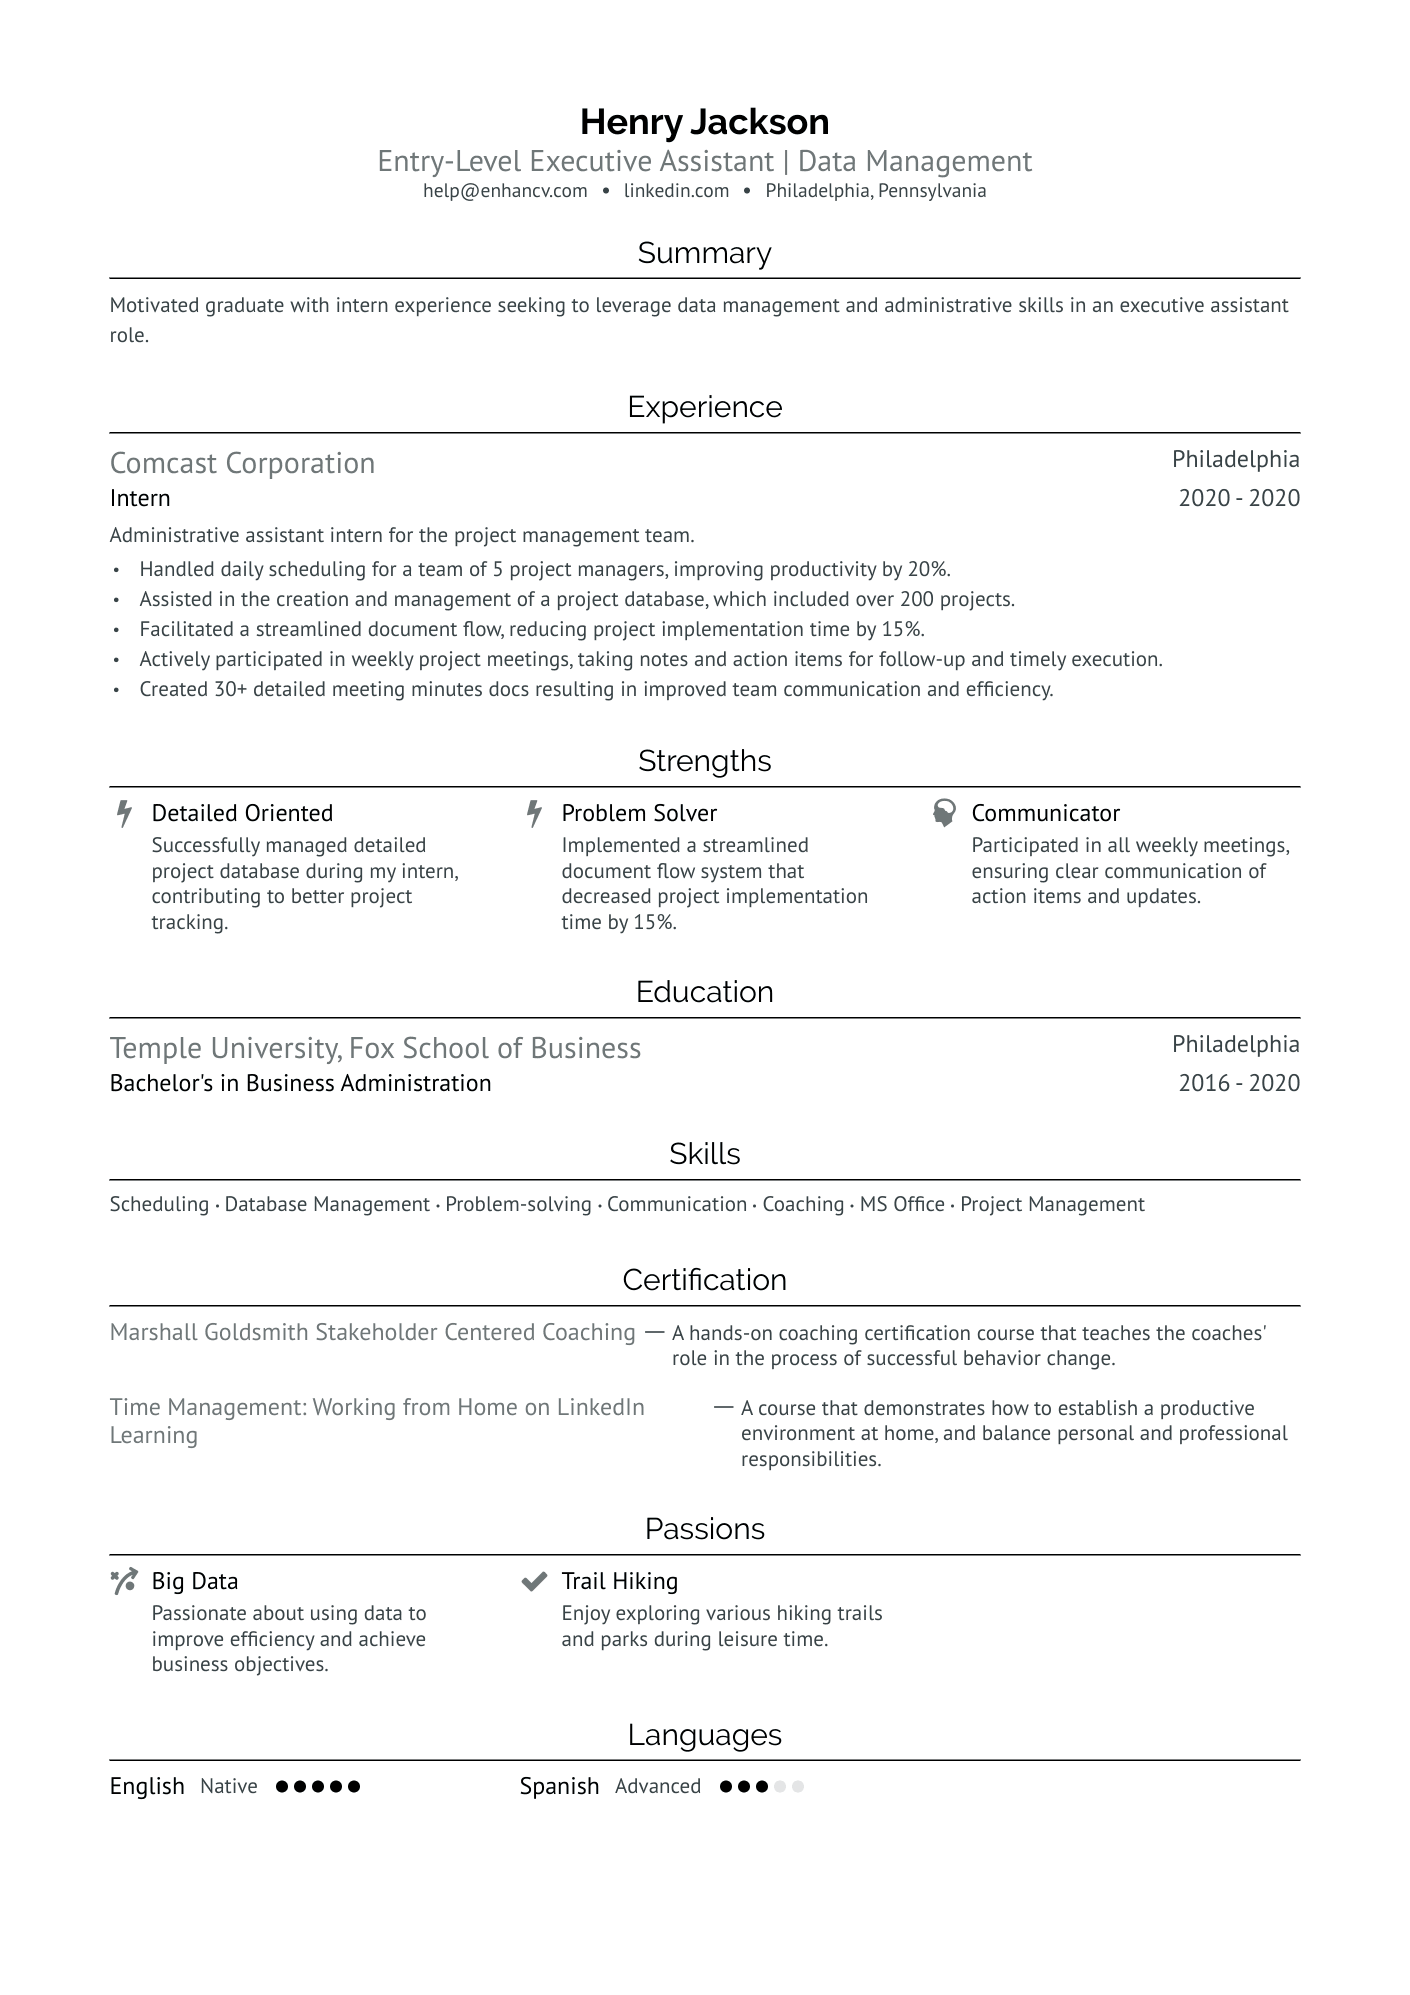 executive assistant resume template free